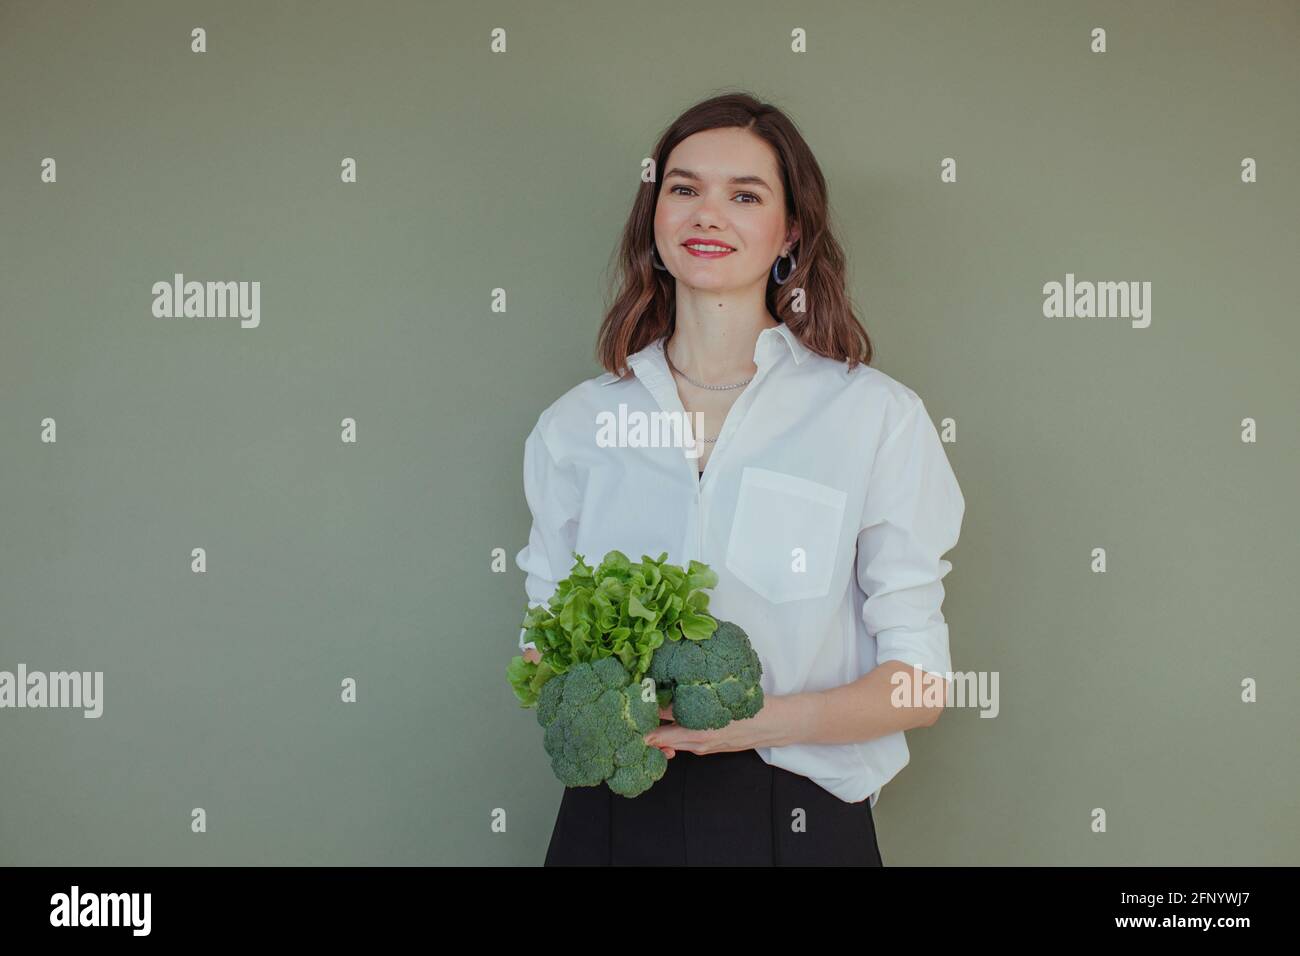 Portrait of a beautiful smiling woman holding fresh broccoli and lettuce Stock Photo